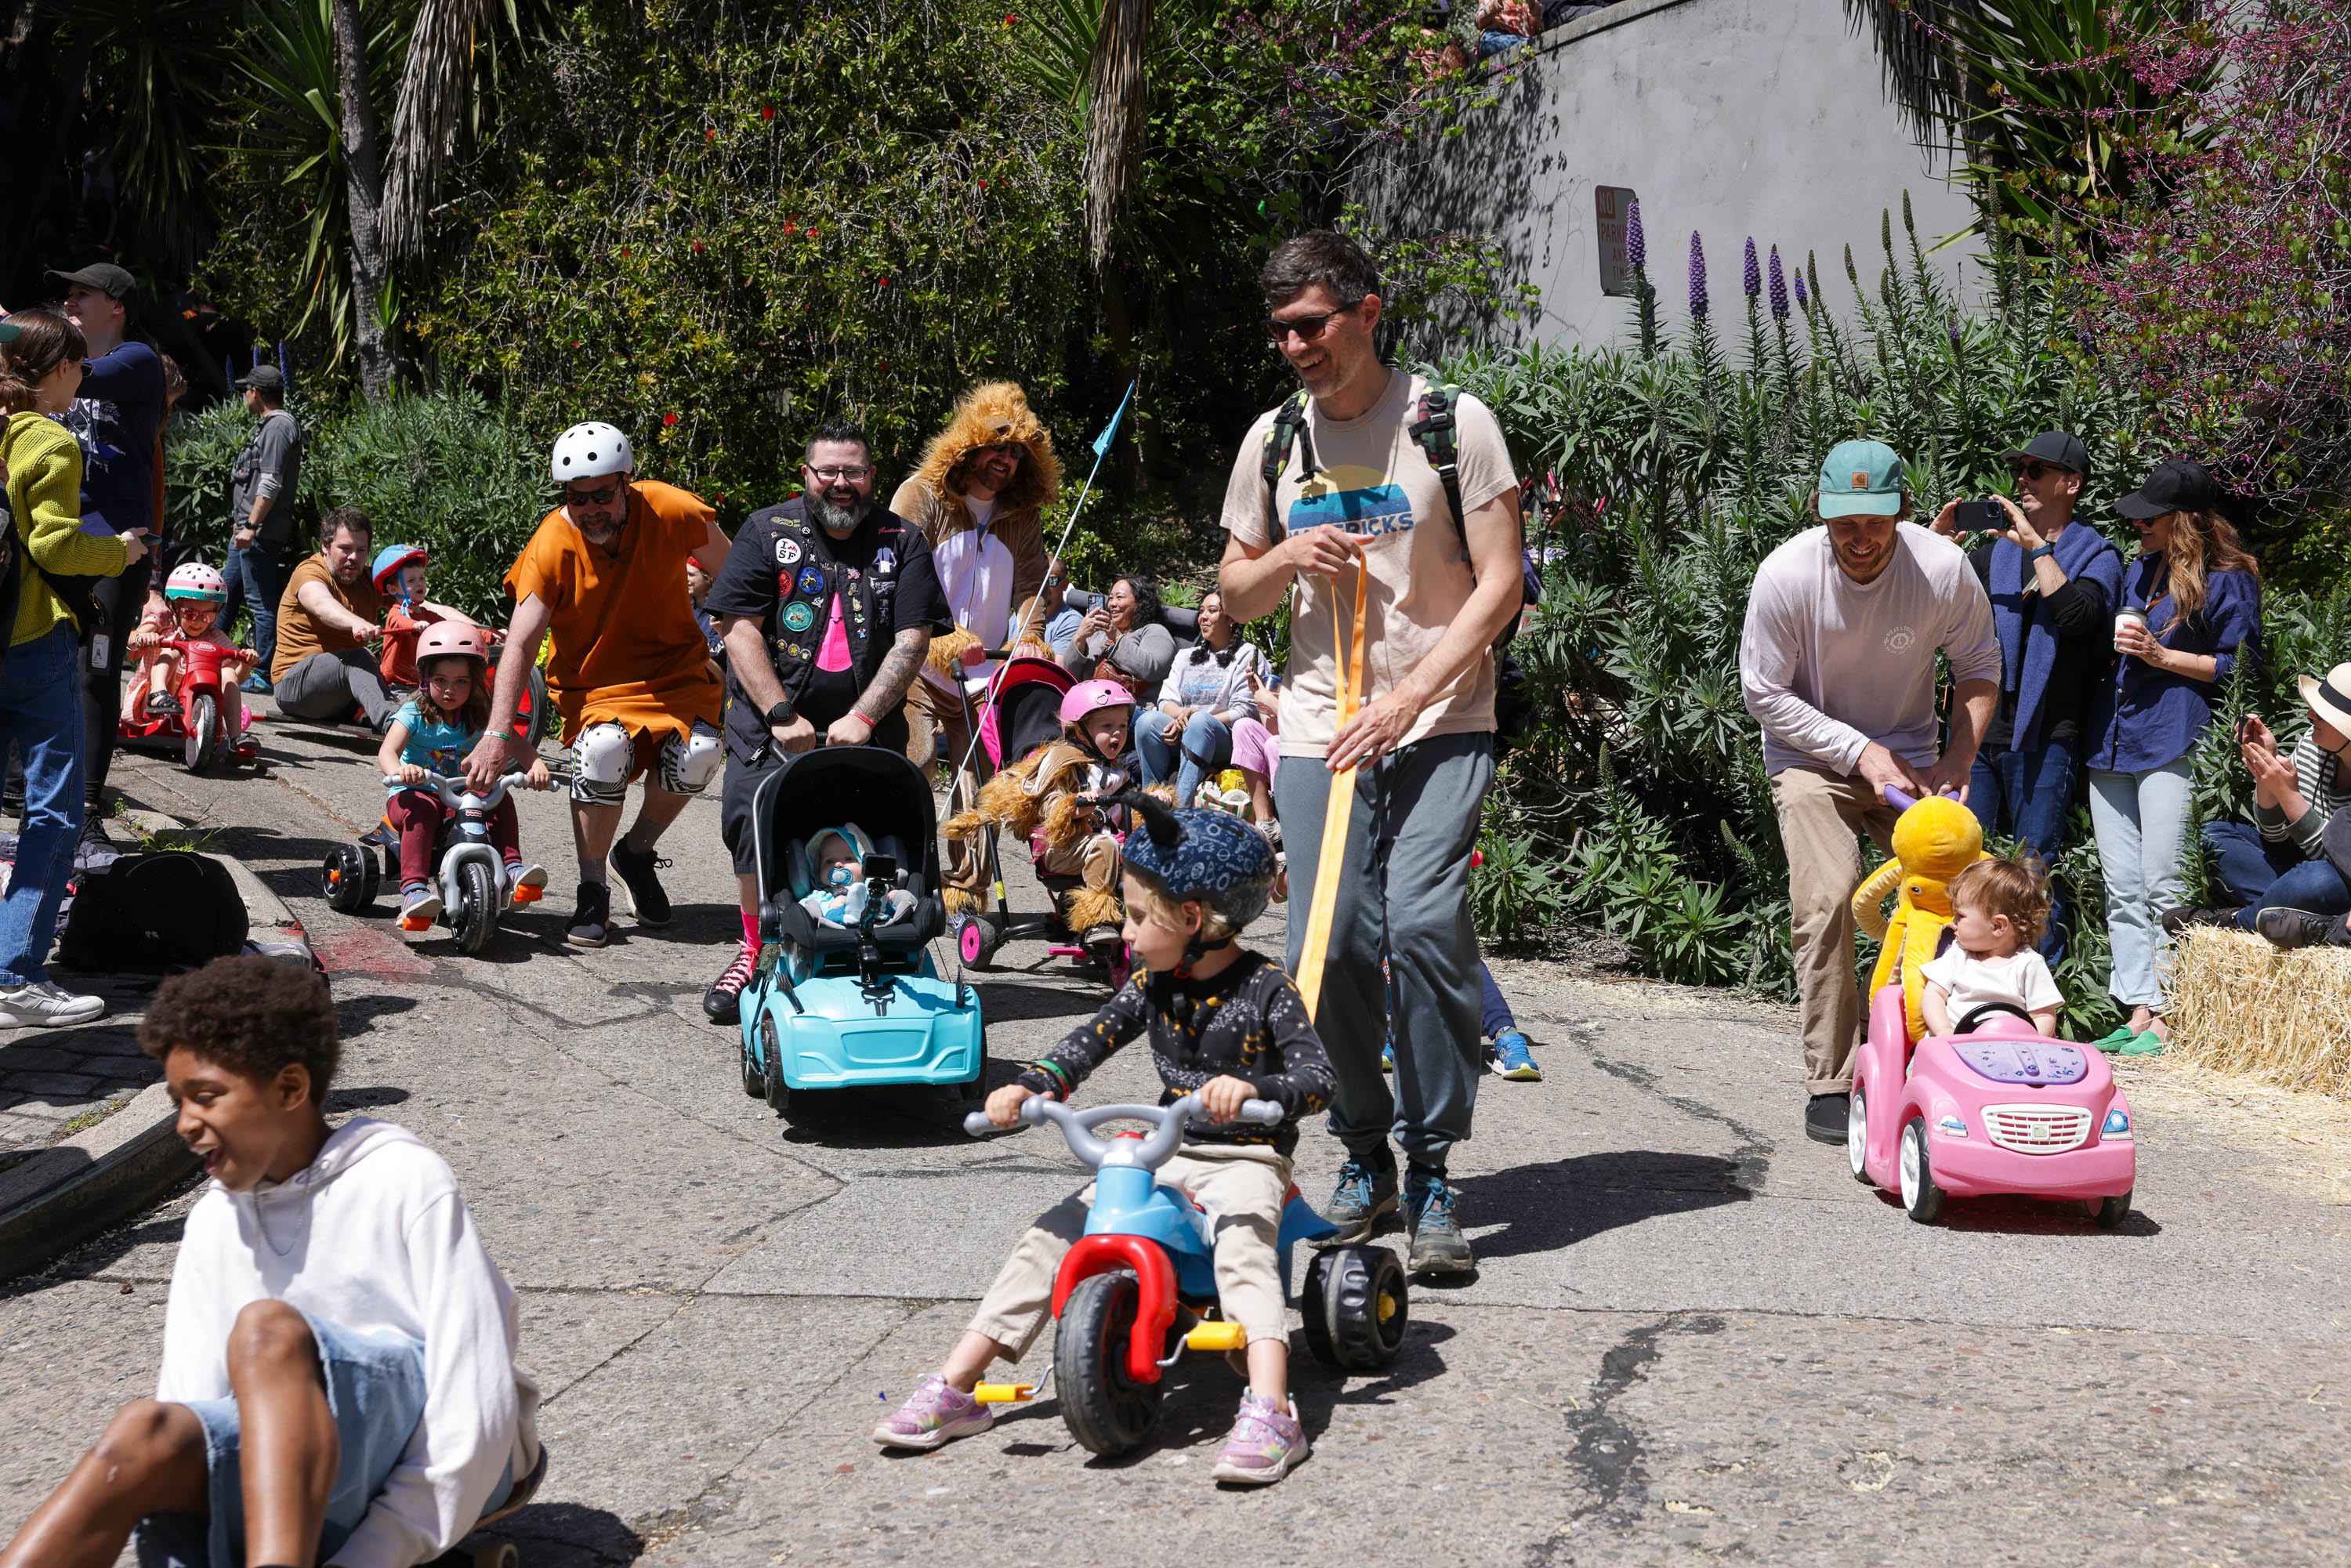 A lively outdoor scene where adults and kids happily participate in a toy vehicle parade on a sunny day, with spectators lining the path.